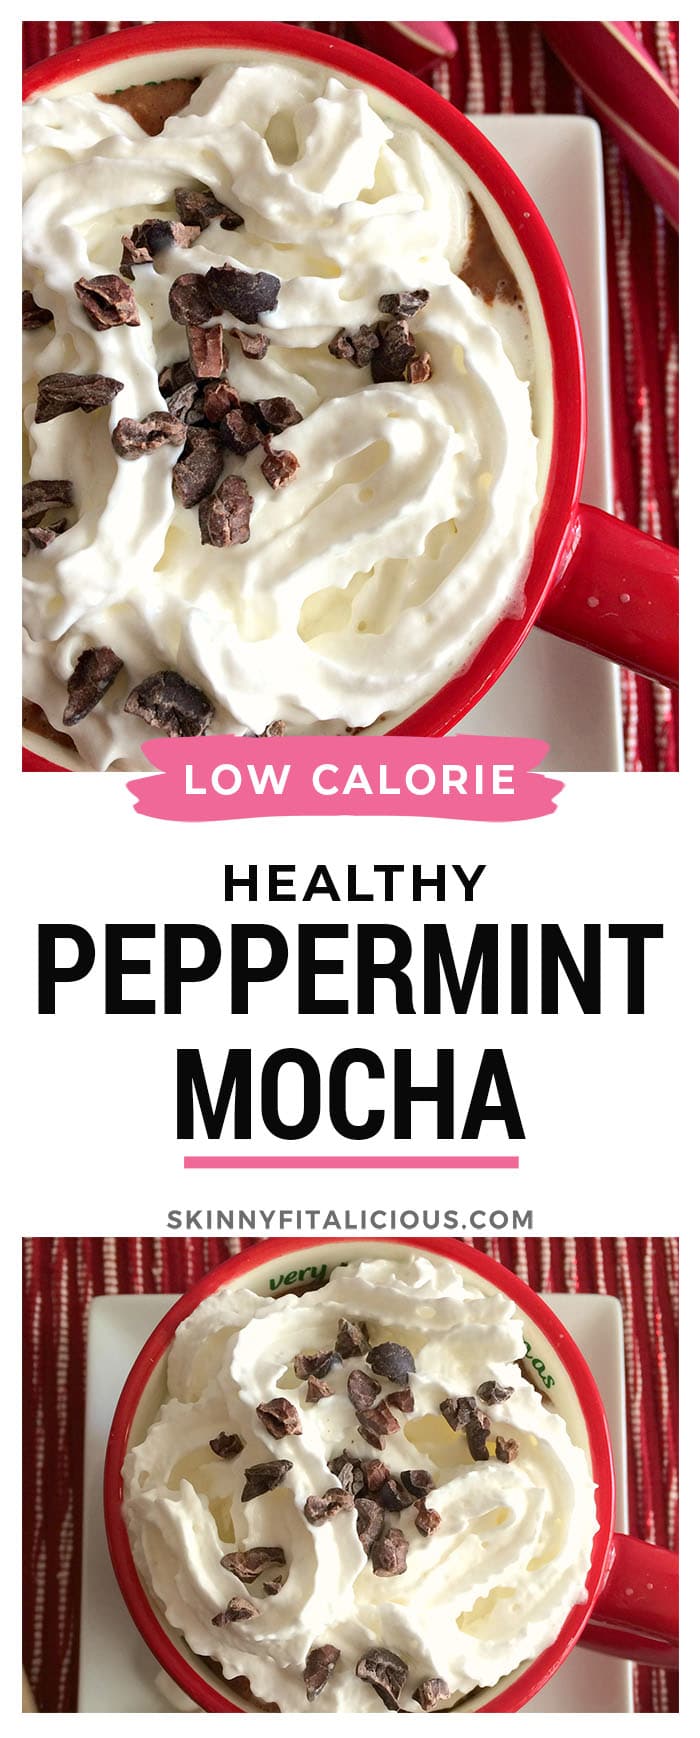 Skinny Peppermint Mocha laden with mint and chocolate. A favorite Starbucks re-creation that's gracious to your waistline and costs less money too!